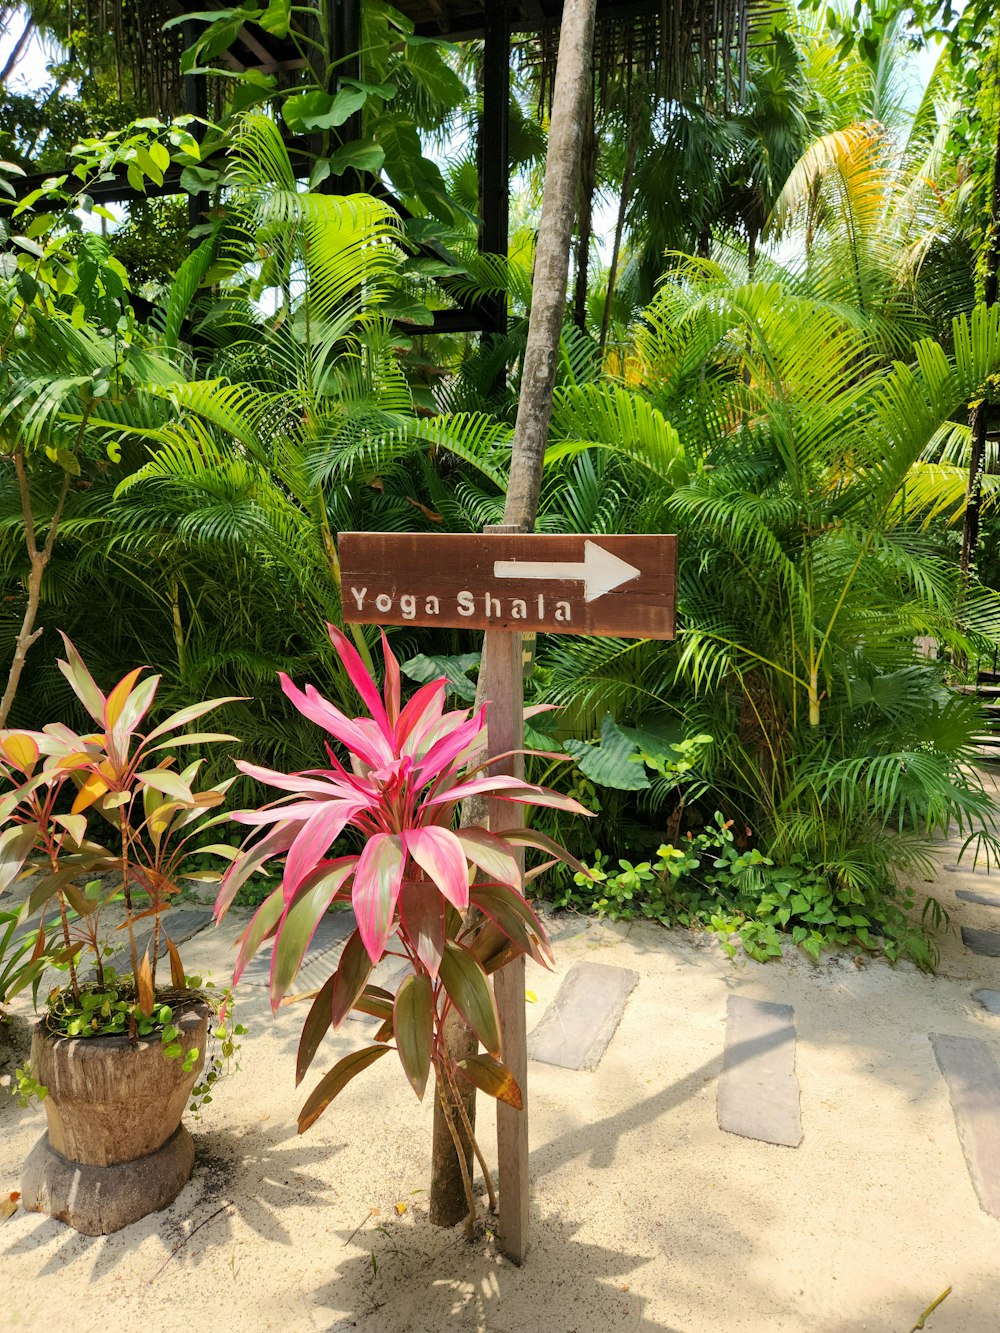 a sign pointing to yonn shala in a tropical setting